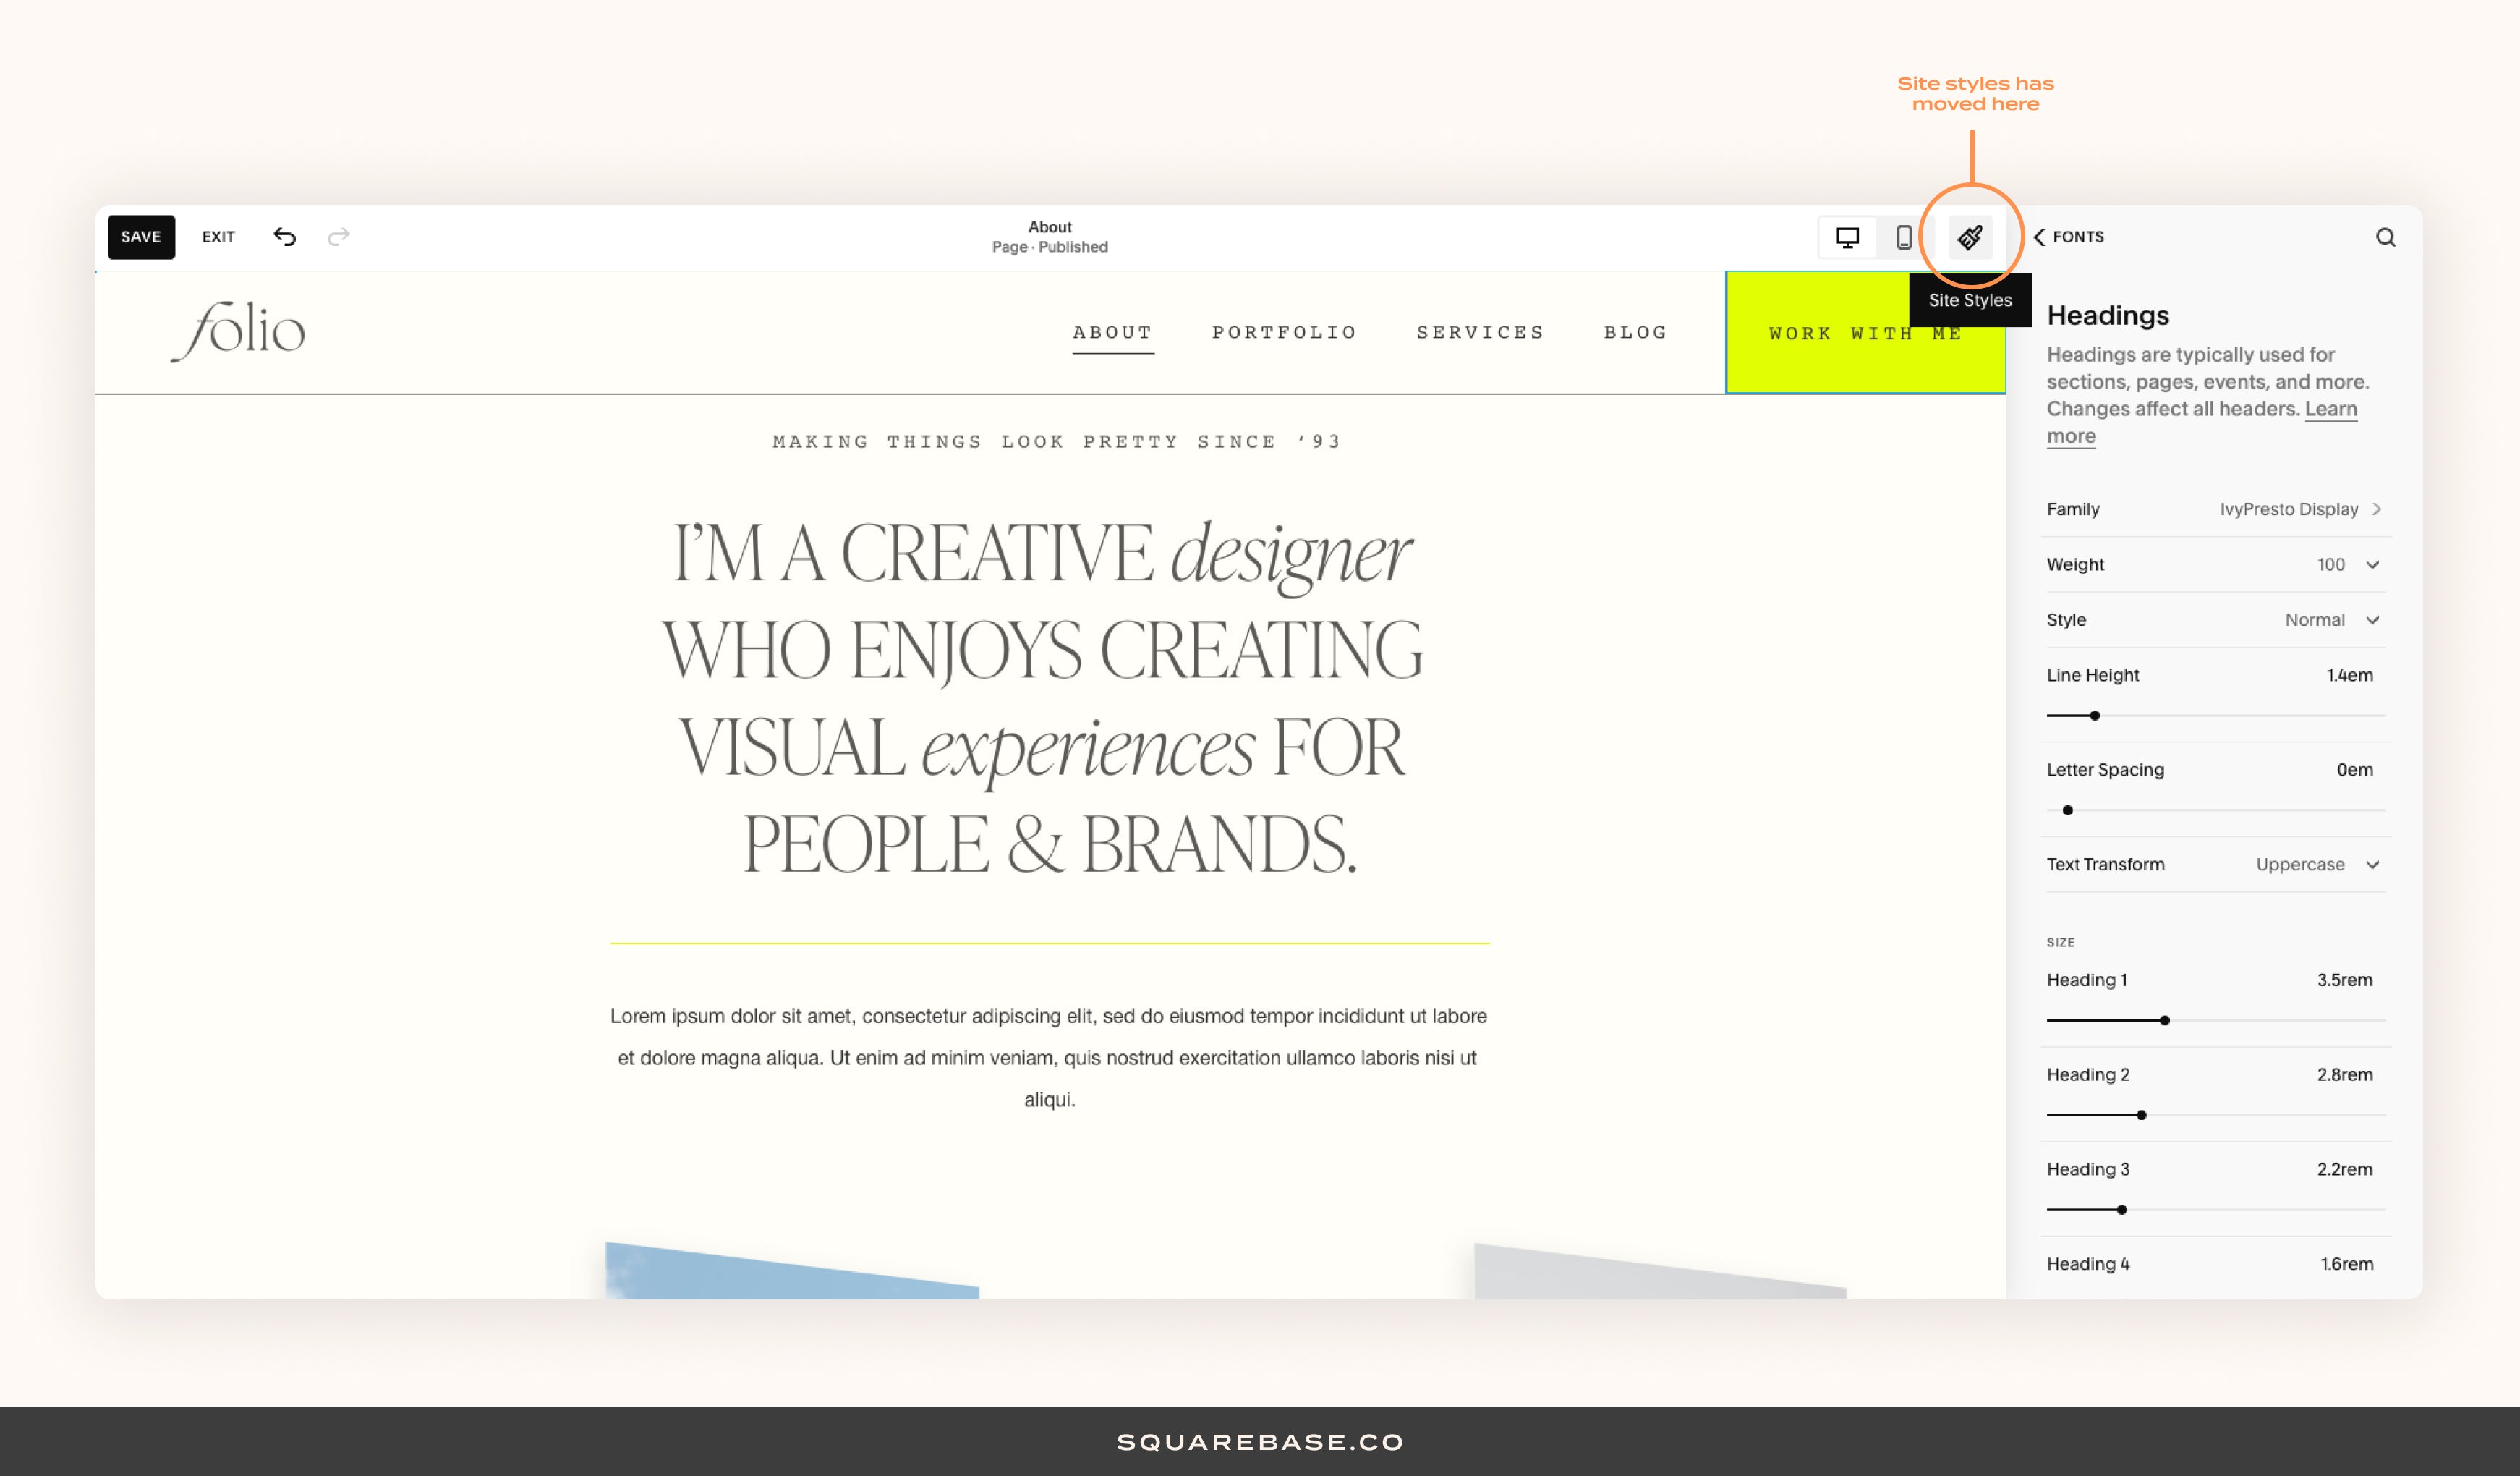 where-has-squarespace-styles moved-to- Squarebase-Squarespace-Template-Kits-1